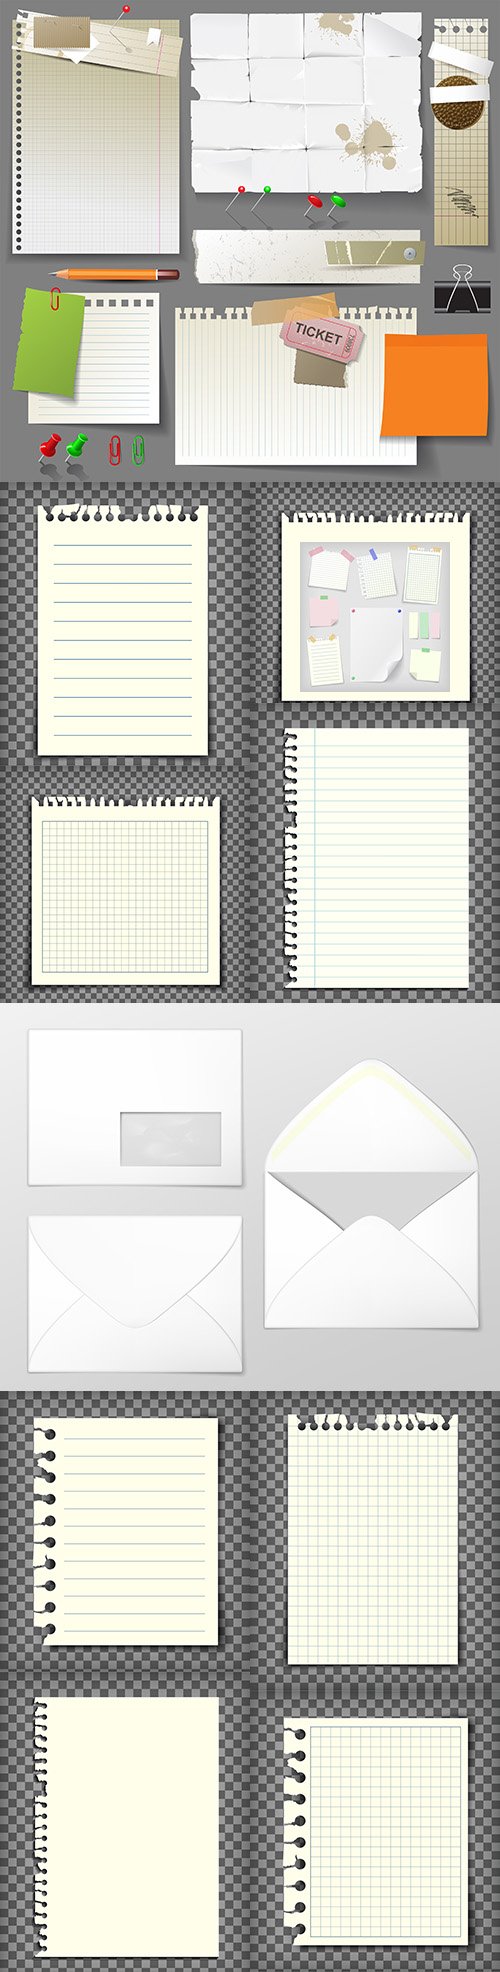 Written paper and sheets notebook collection illustrations